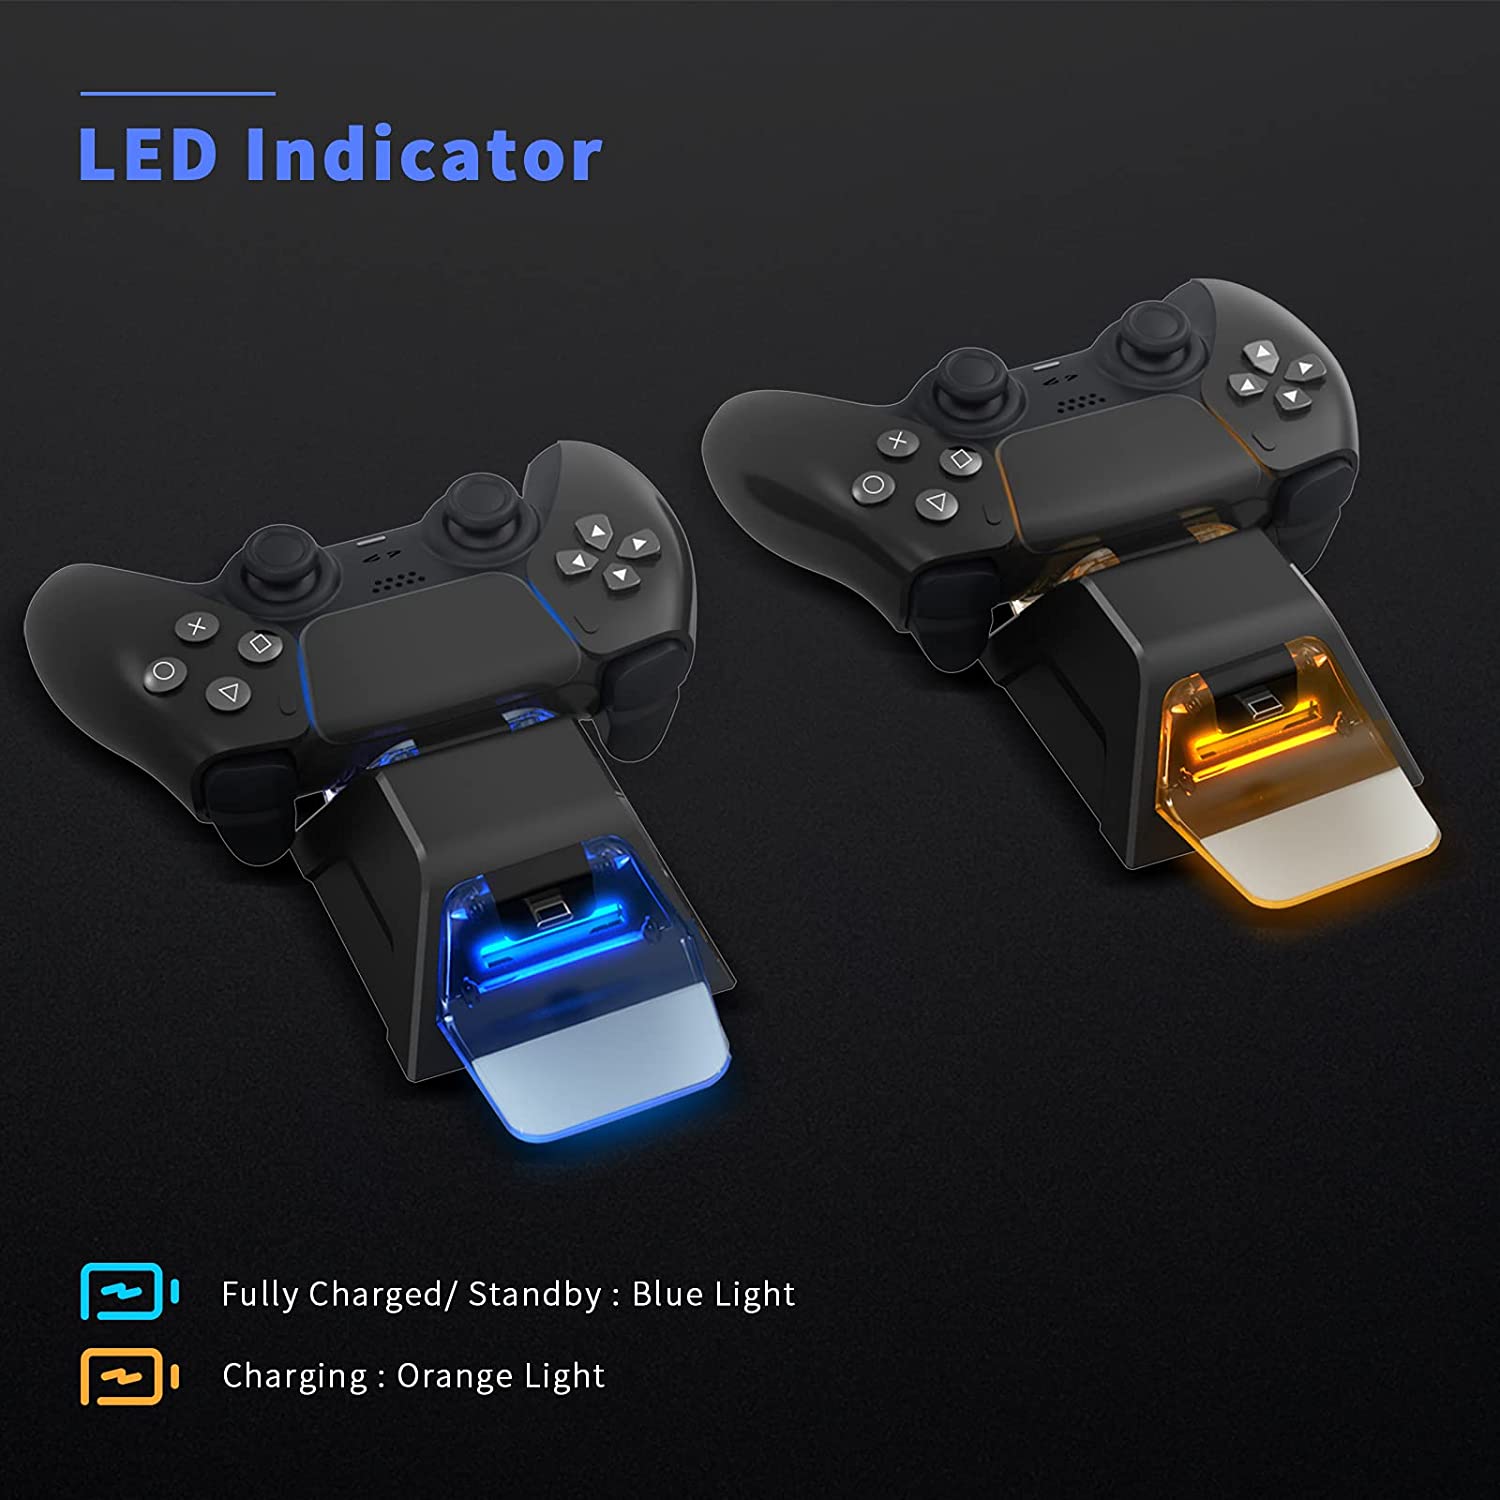 LED indicators show charging status instantly: orange for charging in progress, blue for ready/full.